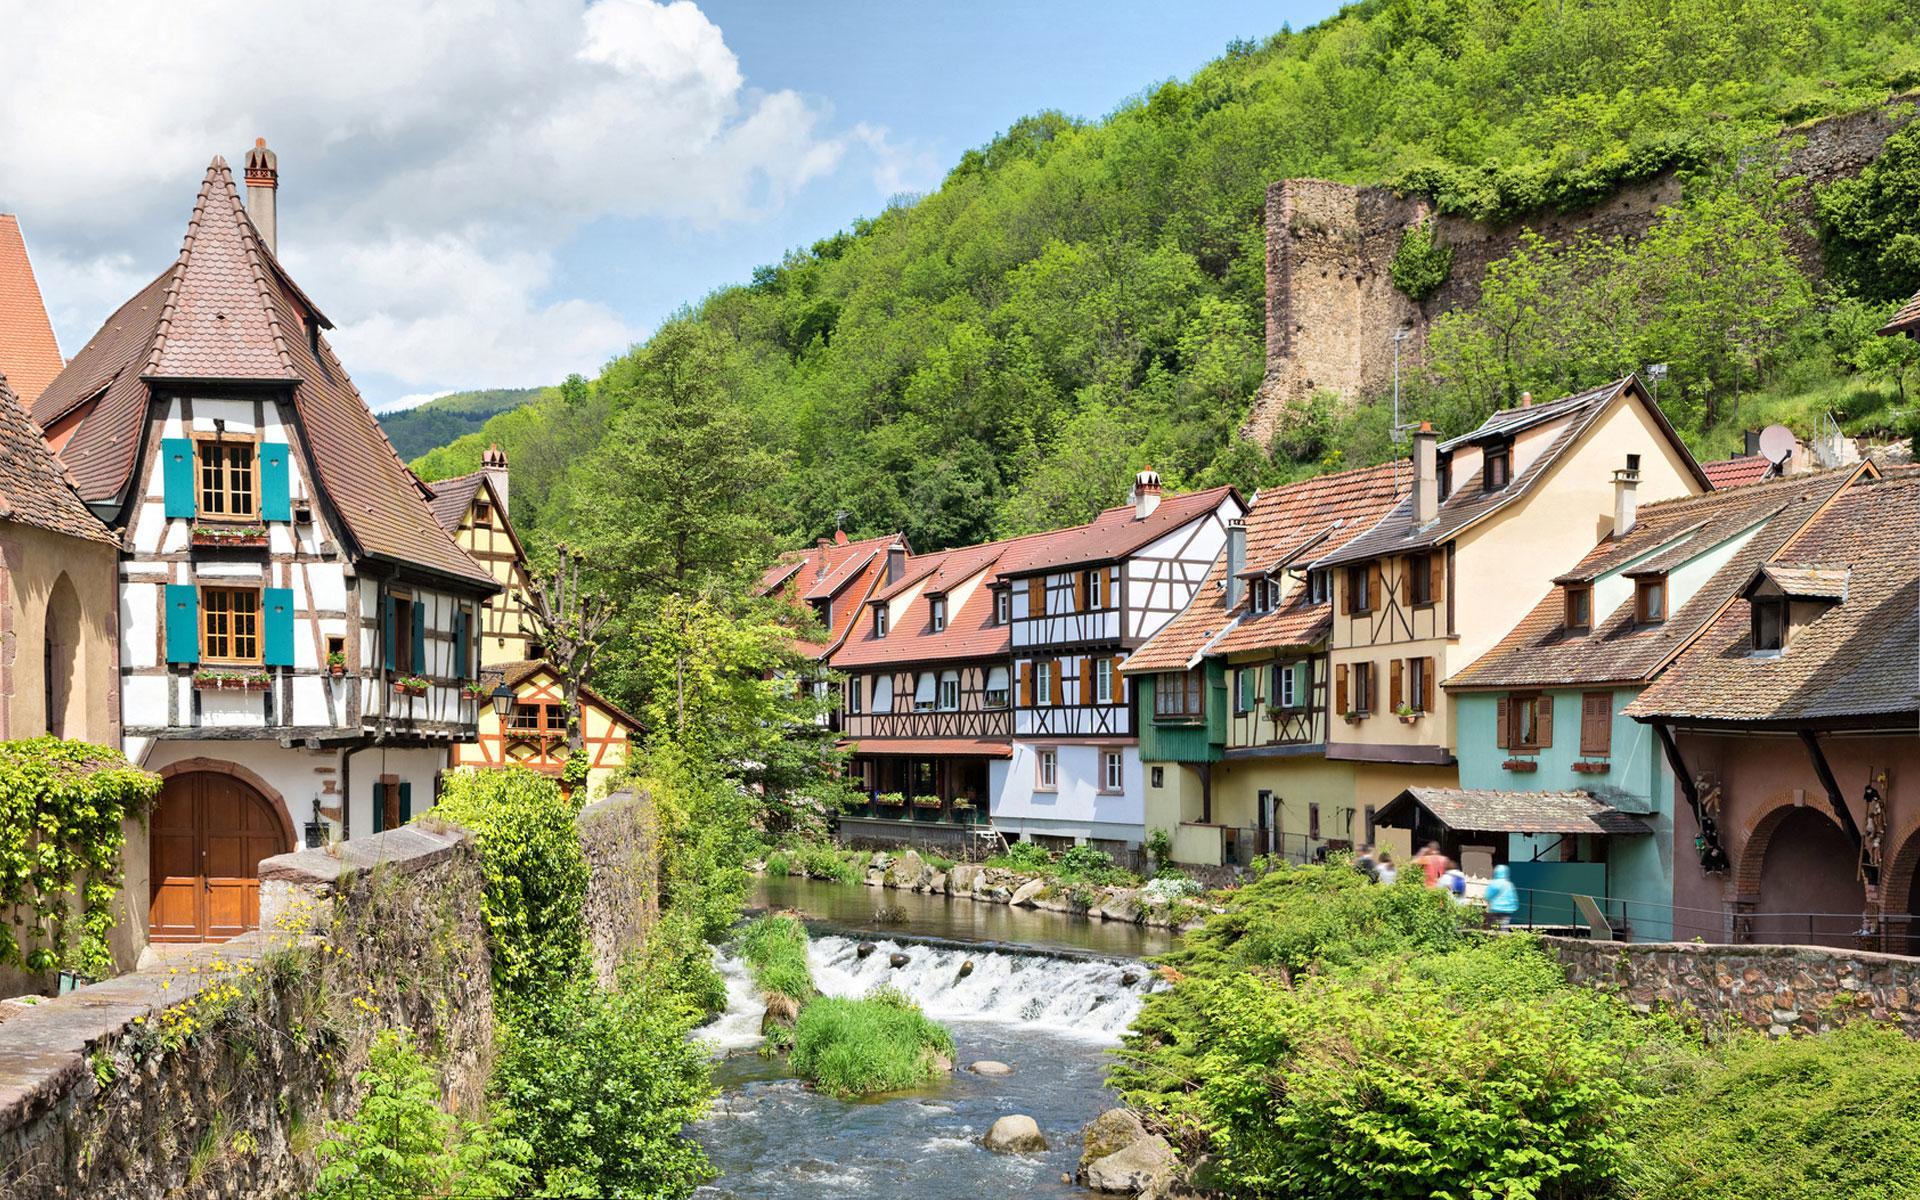 River crossing Kaysersberg, named favourite village of the French